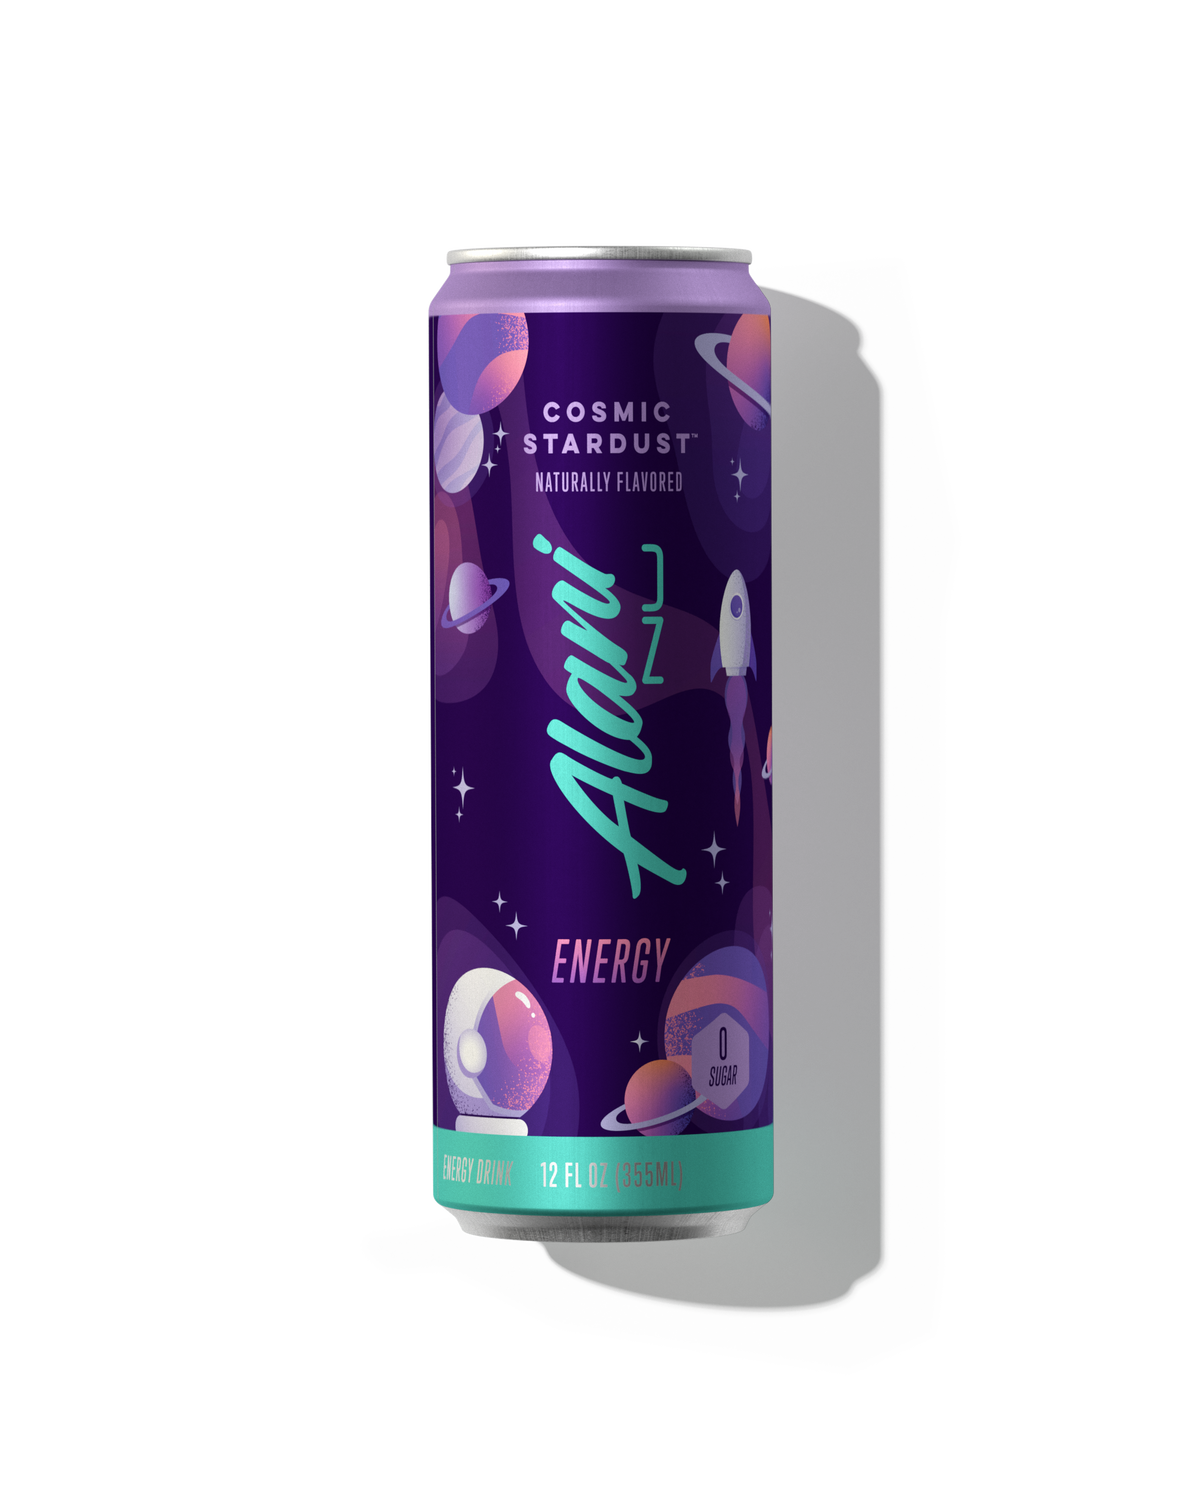 A 12 fl oz can of Energy Drink in Cosmic Stardust flavor.